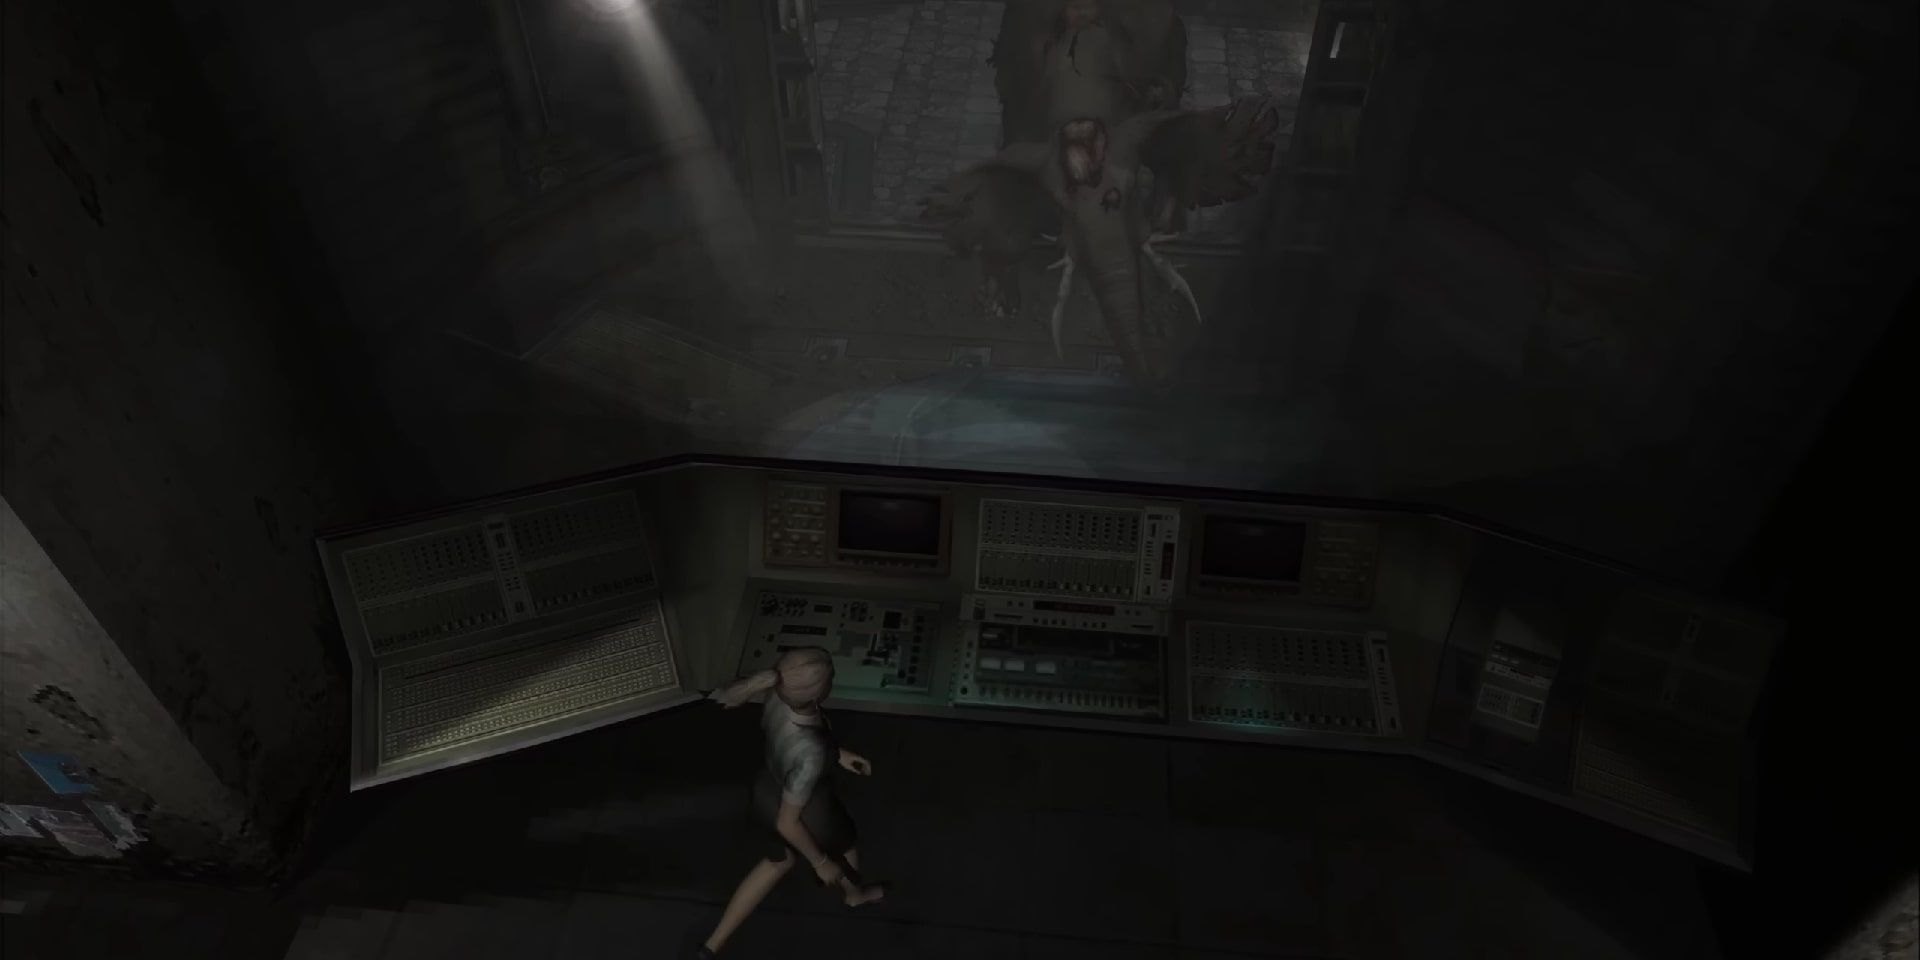 Cindy running to a control panel while a zombified elephant roams through the floor below her in Resident Evil Outbreak: File 2